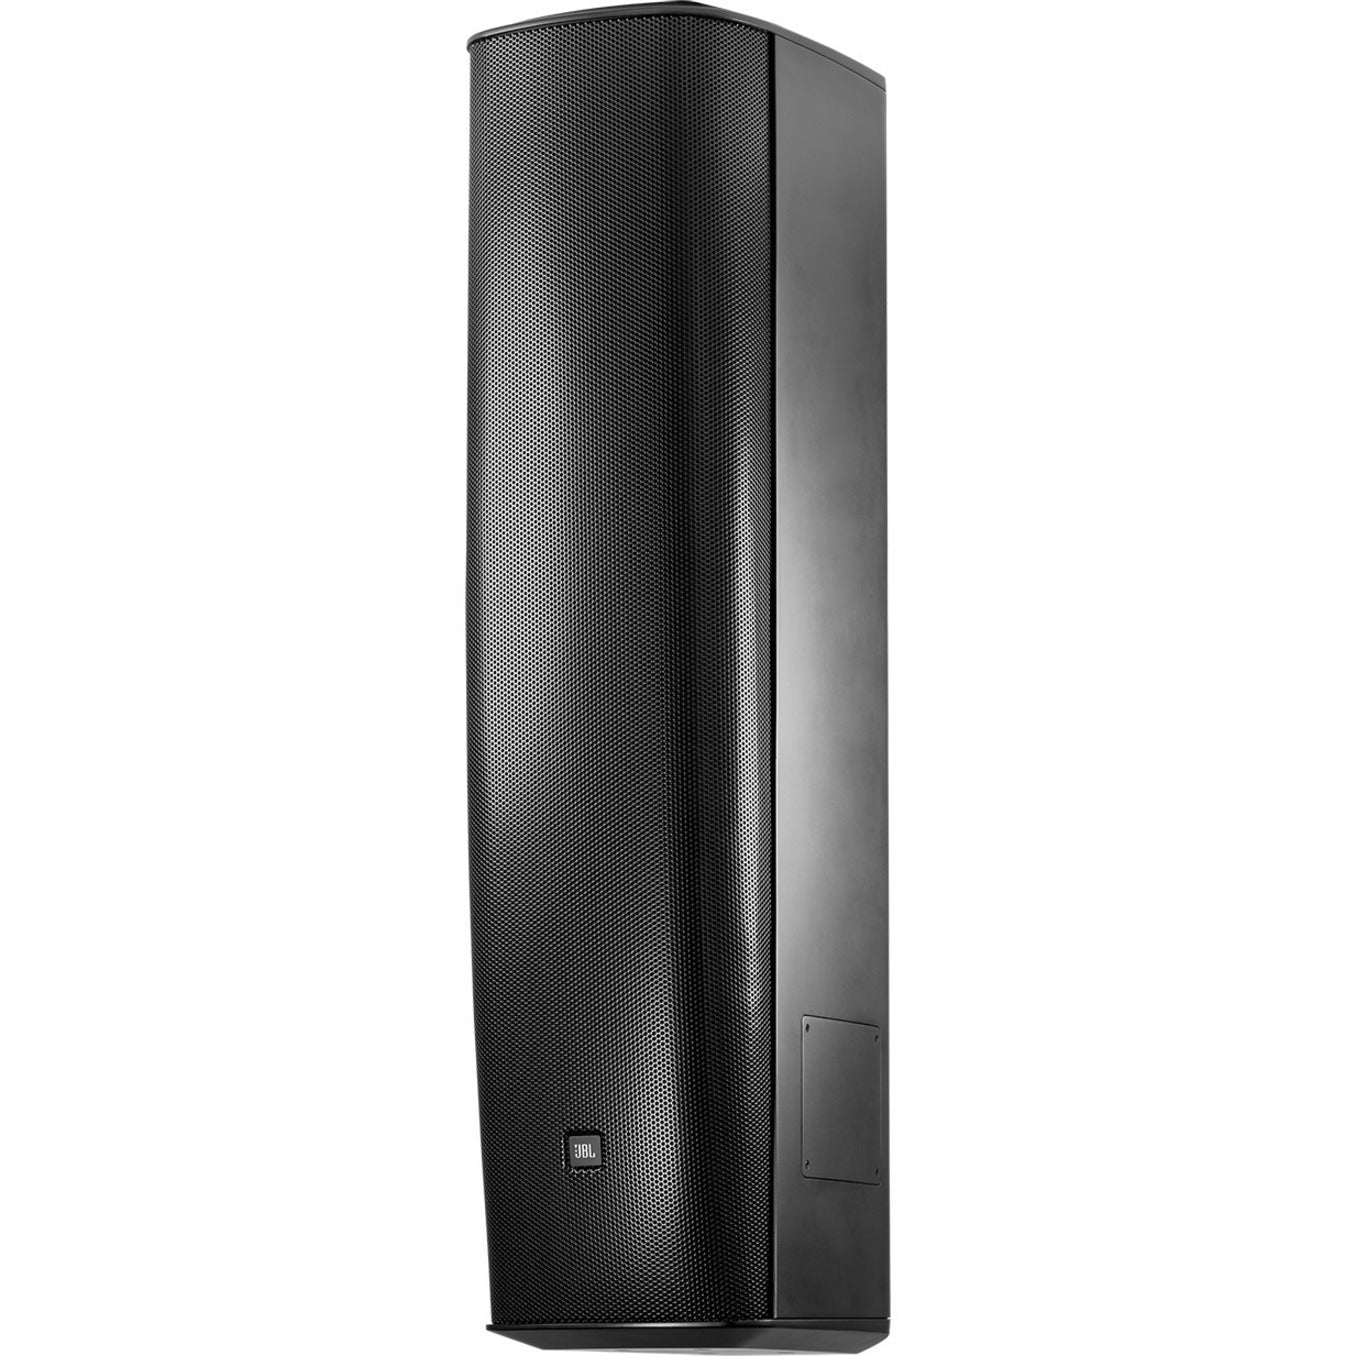 JBL Professional CBT 1000 Line Array Speaker, Indoor/Outdoor, 1500W RMS Output Power, 137dB Sensitivity